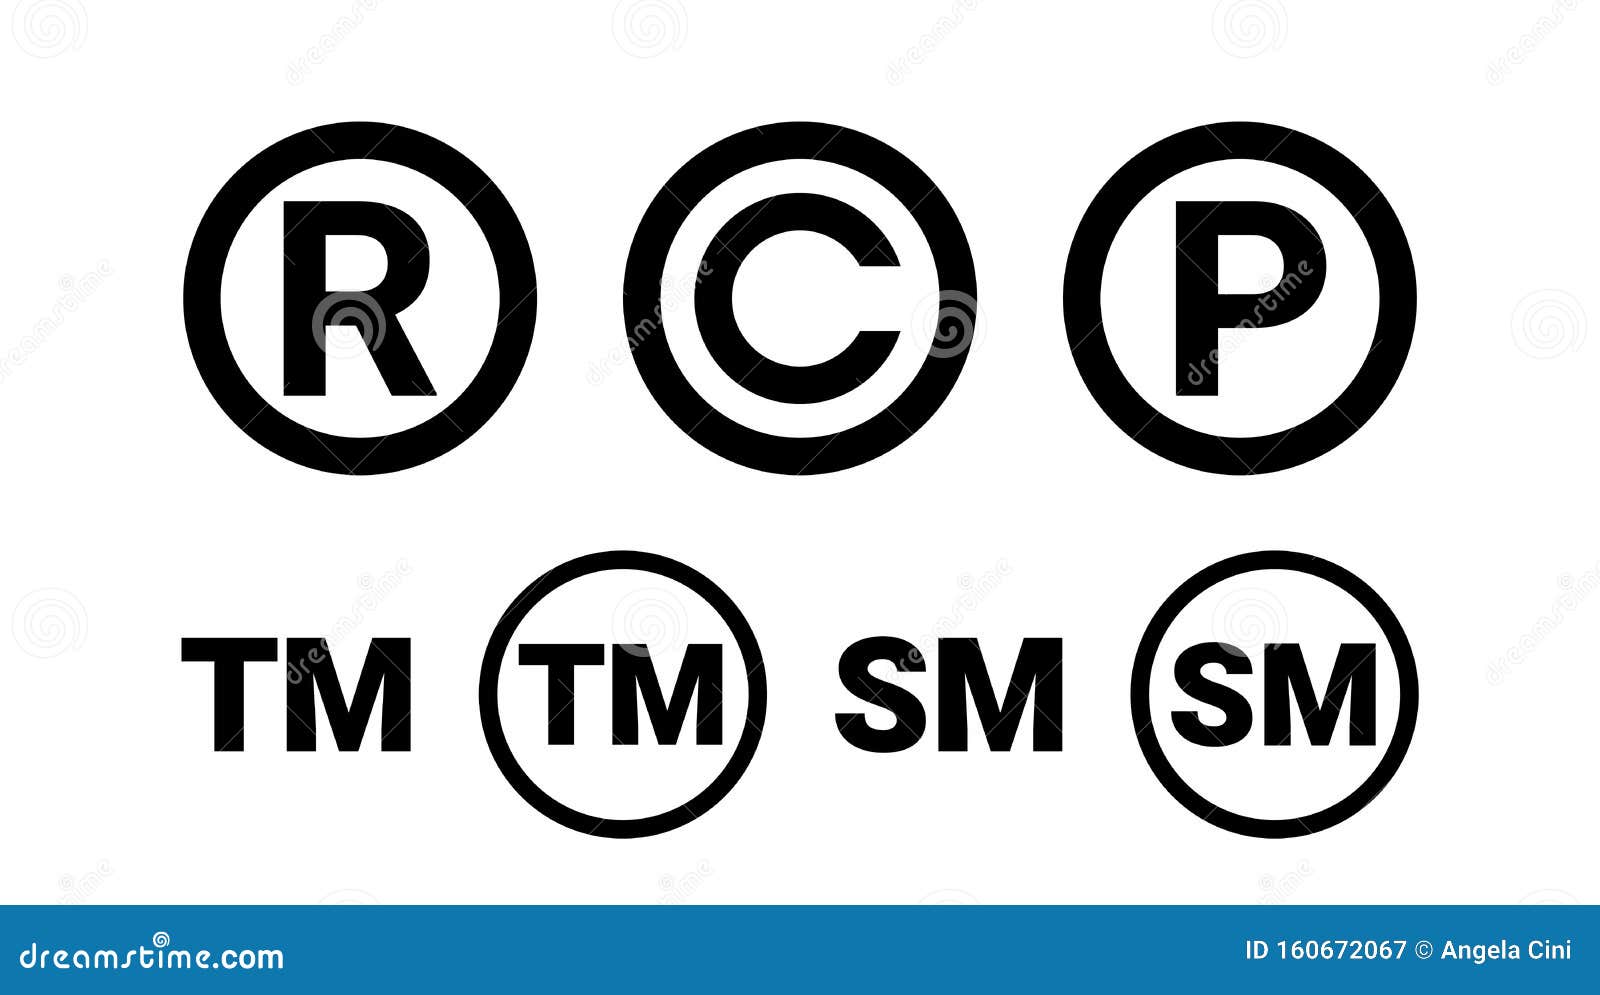 registered trademark copyright patent and service mark icon set